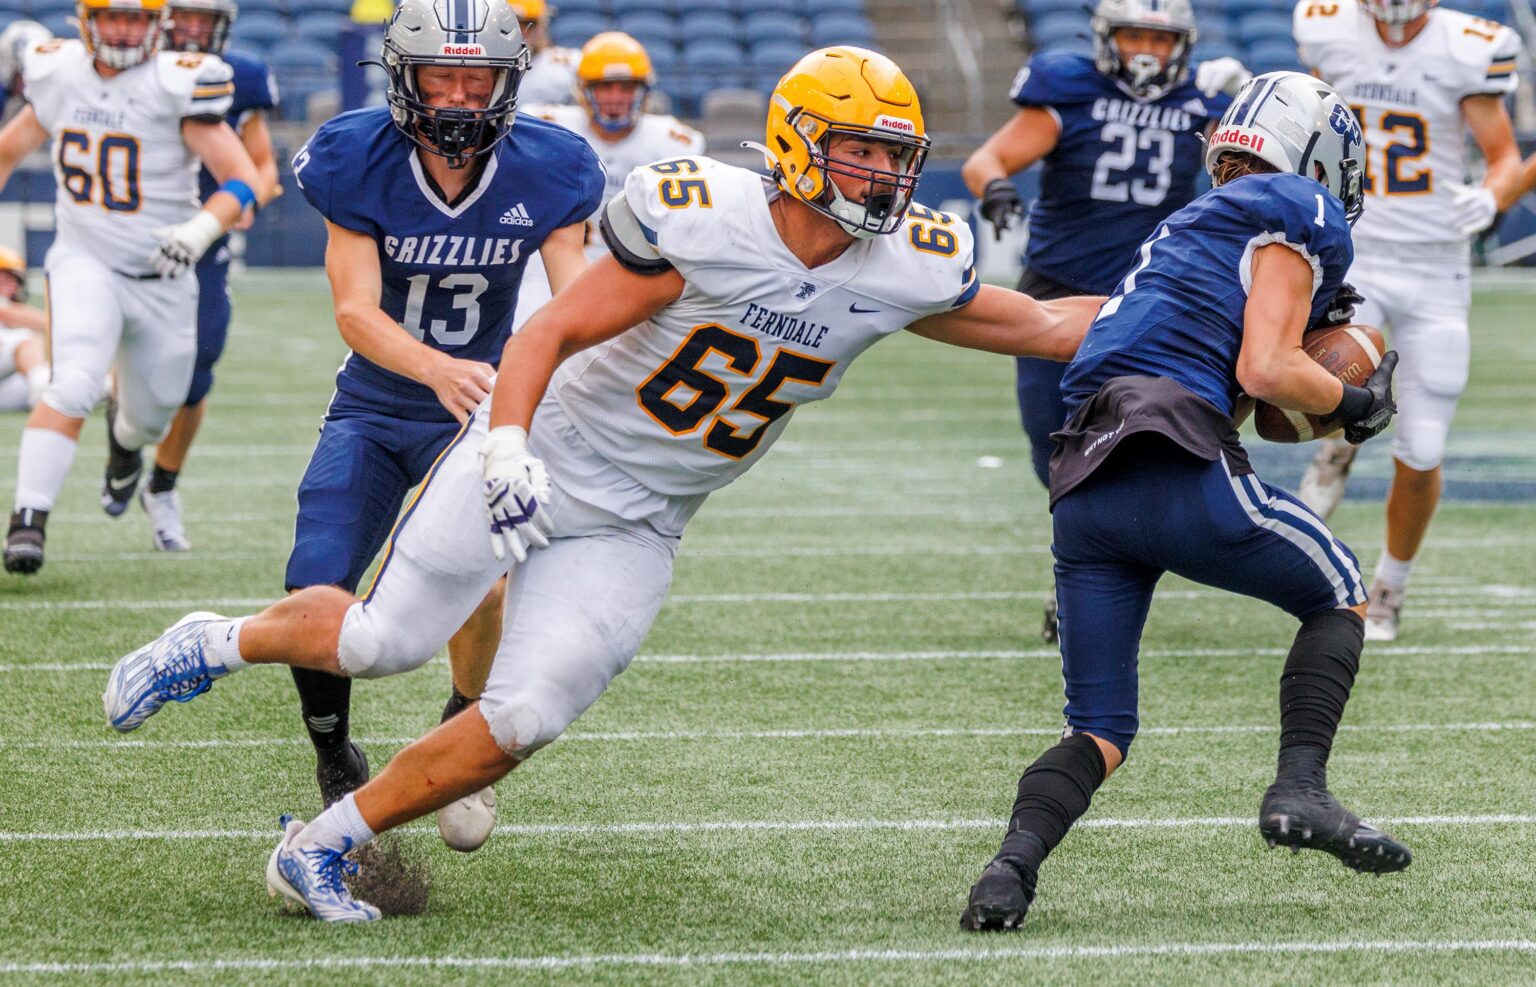 Ferndale's Jake Mason (65) grabs the Glacier Peak quarterback's side in an attempt to take control of the ball as other players rush over to help.